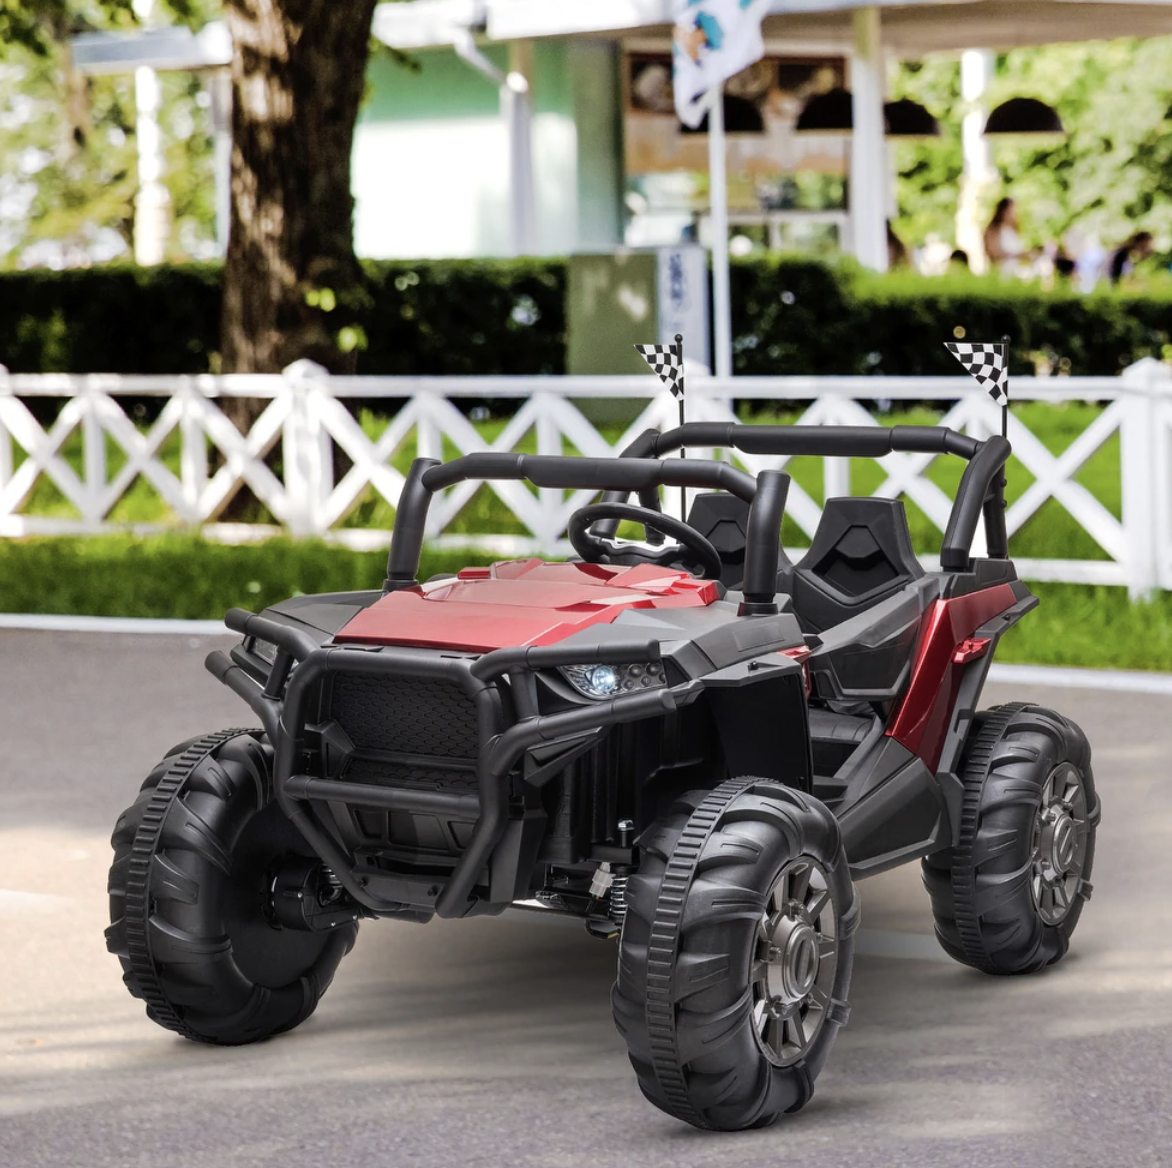 Aosom 12V 2-Seater Kids Electric Ride-On Car Off-Road UTV Truck Toy with Parental Remote Control & 4 Motors